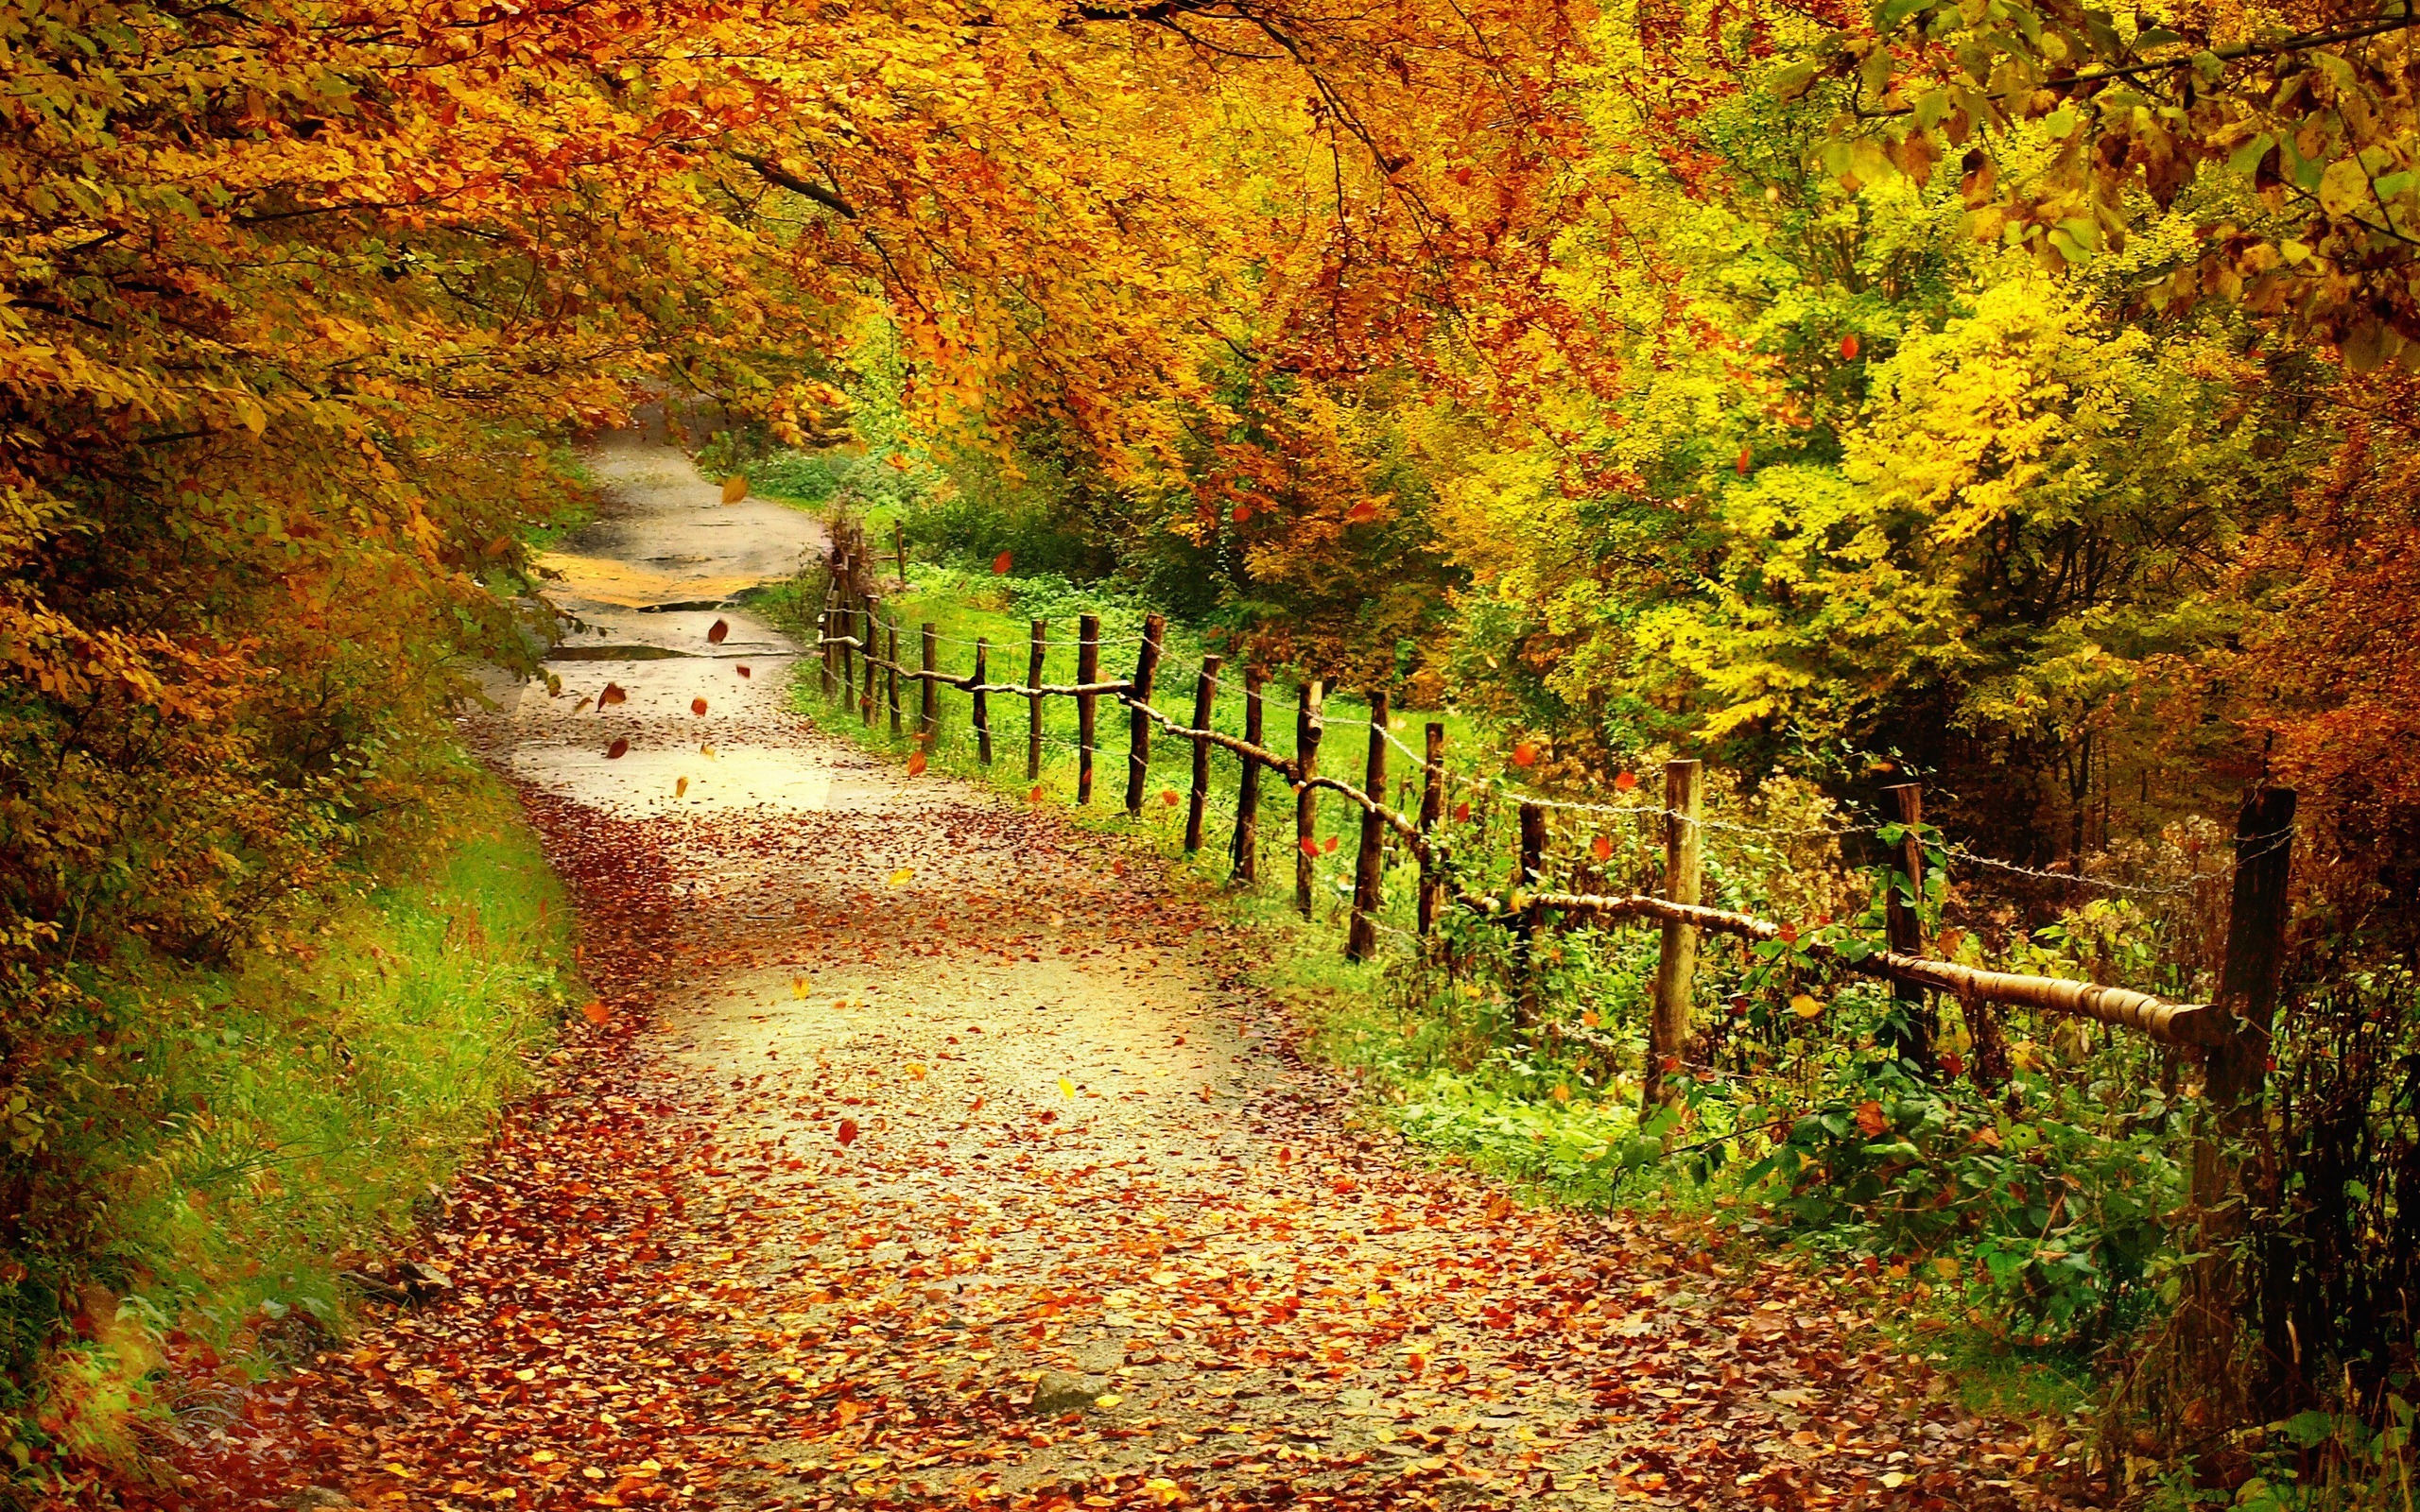 Landscapes Leaf Leaves Nature Path Pathway Road Scenery